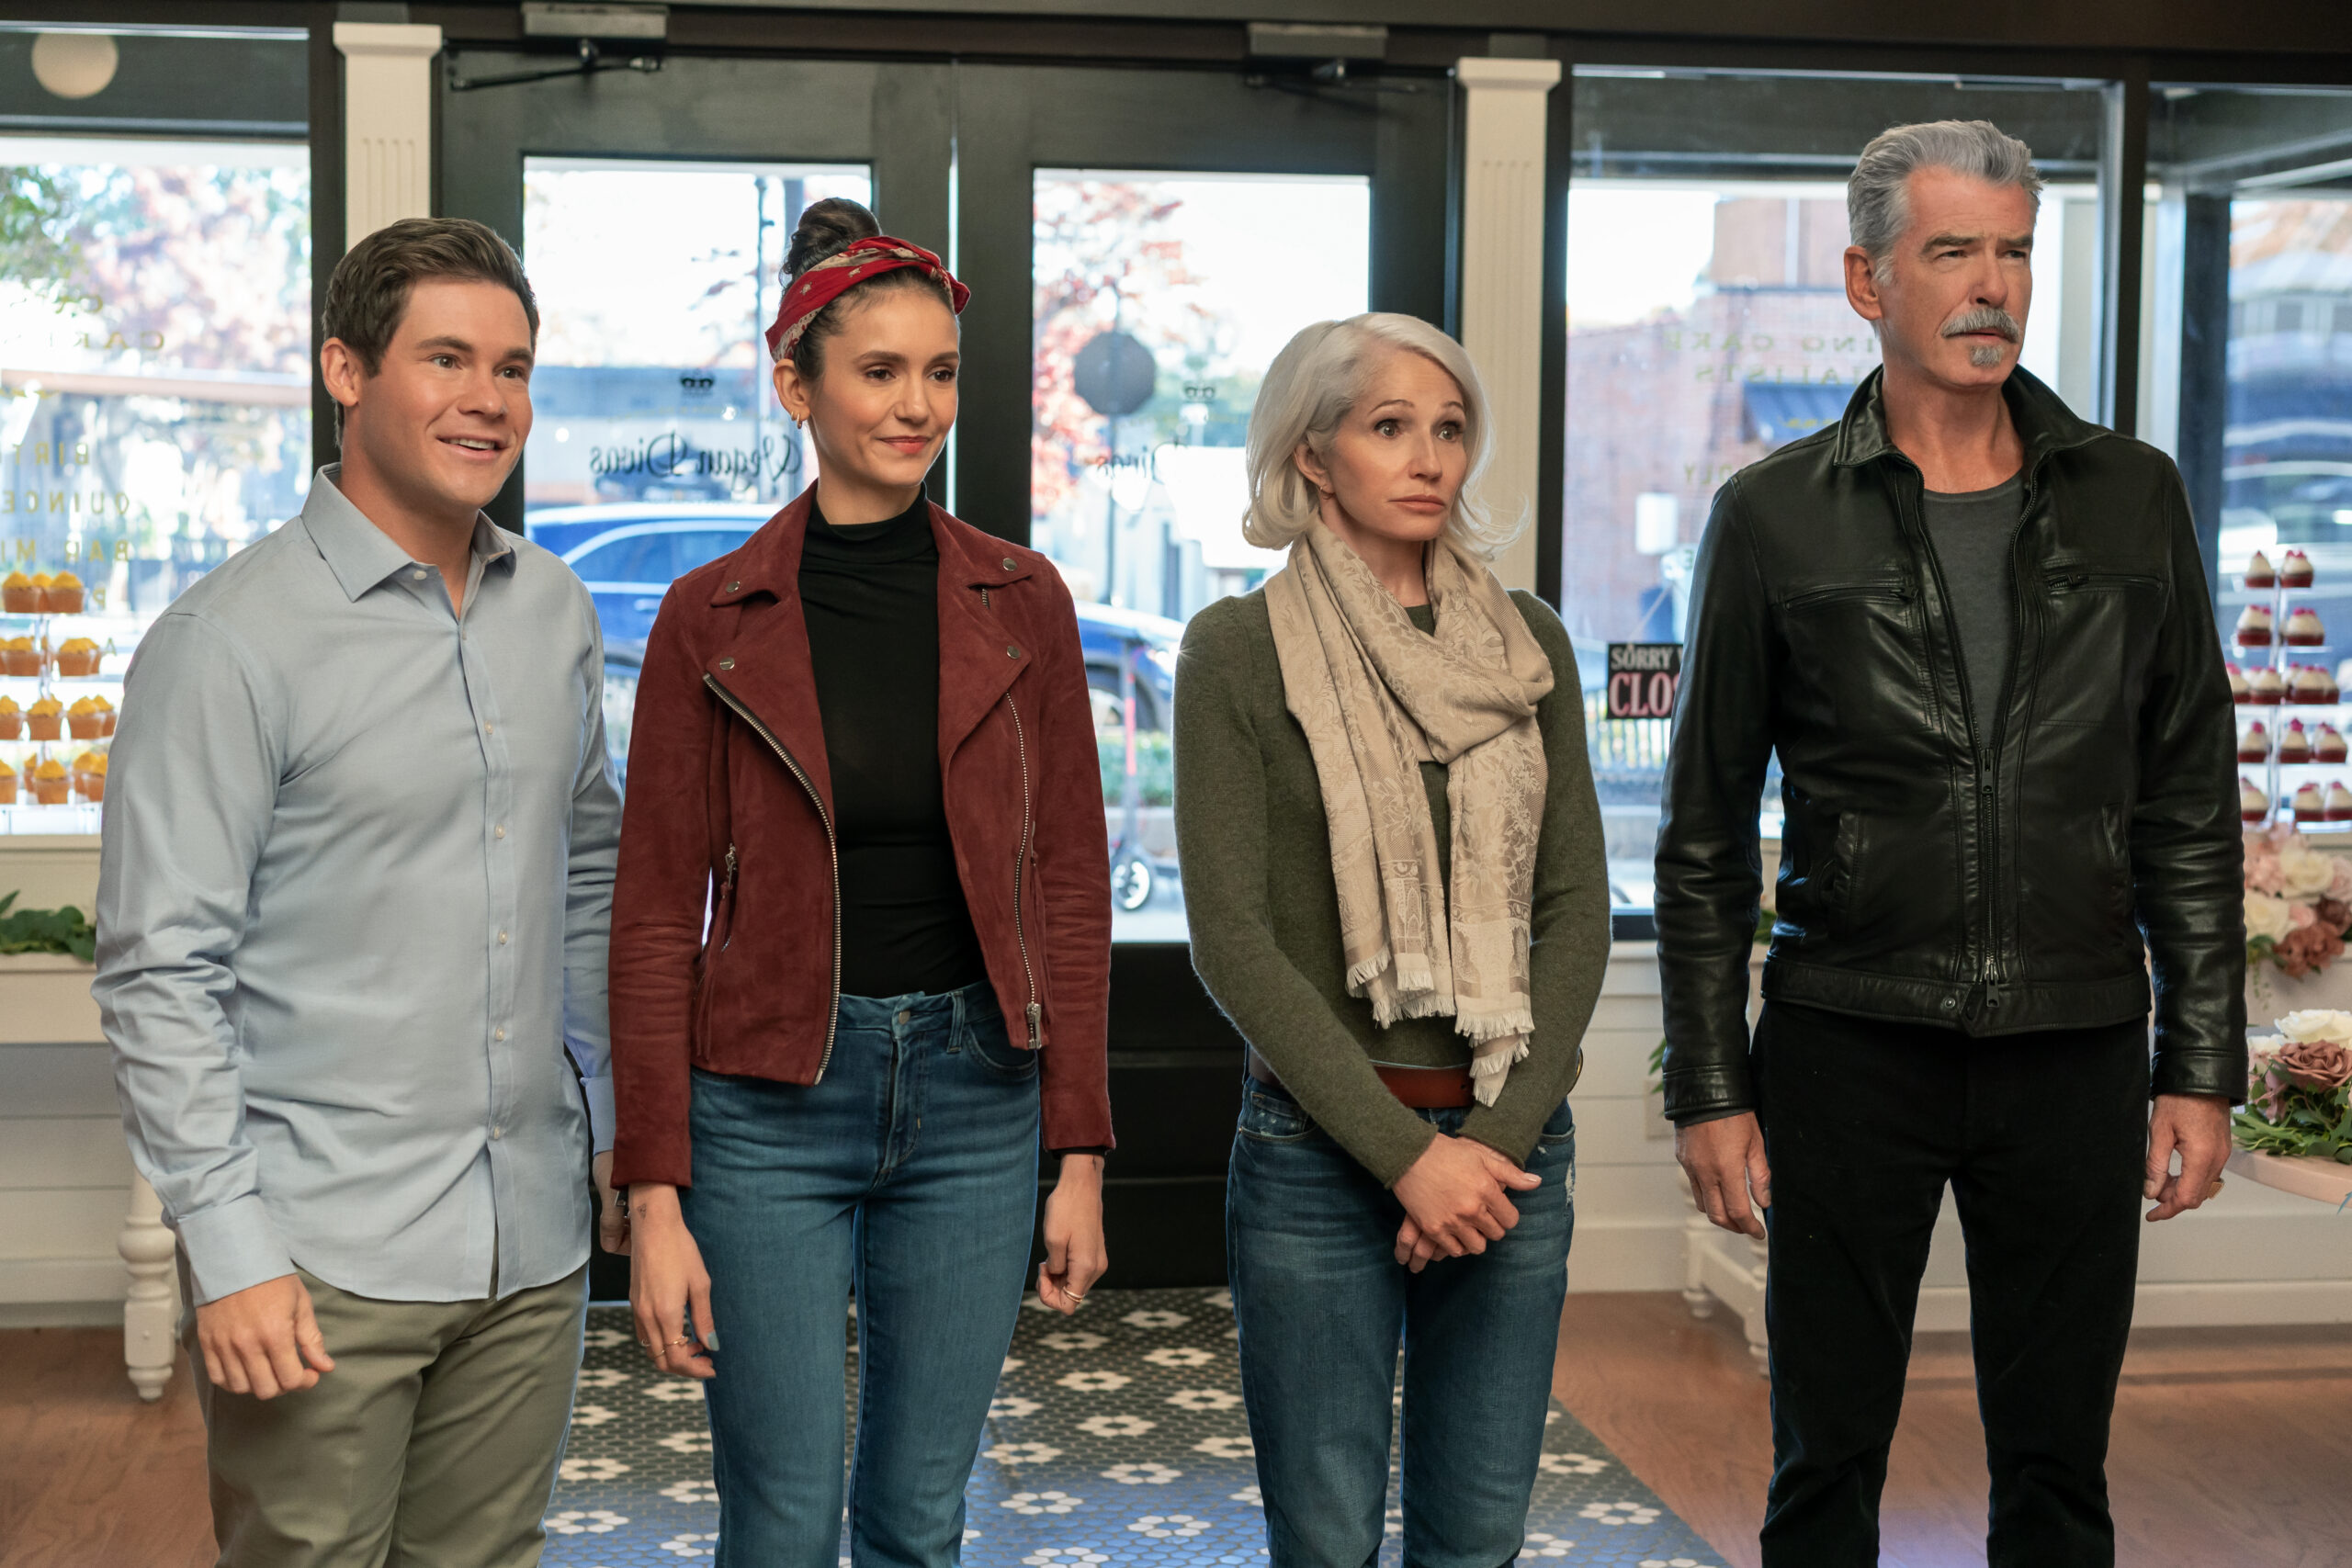 The Out-Laws. (L to R) Adam Devine as Owen Browning, Nina Dobrev as Parker McDermott, Ellen Barkin as Lilly McDermott, Pierce Brosnan as Billy McDermott in The Out-Laws